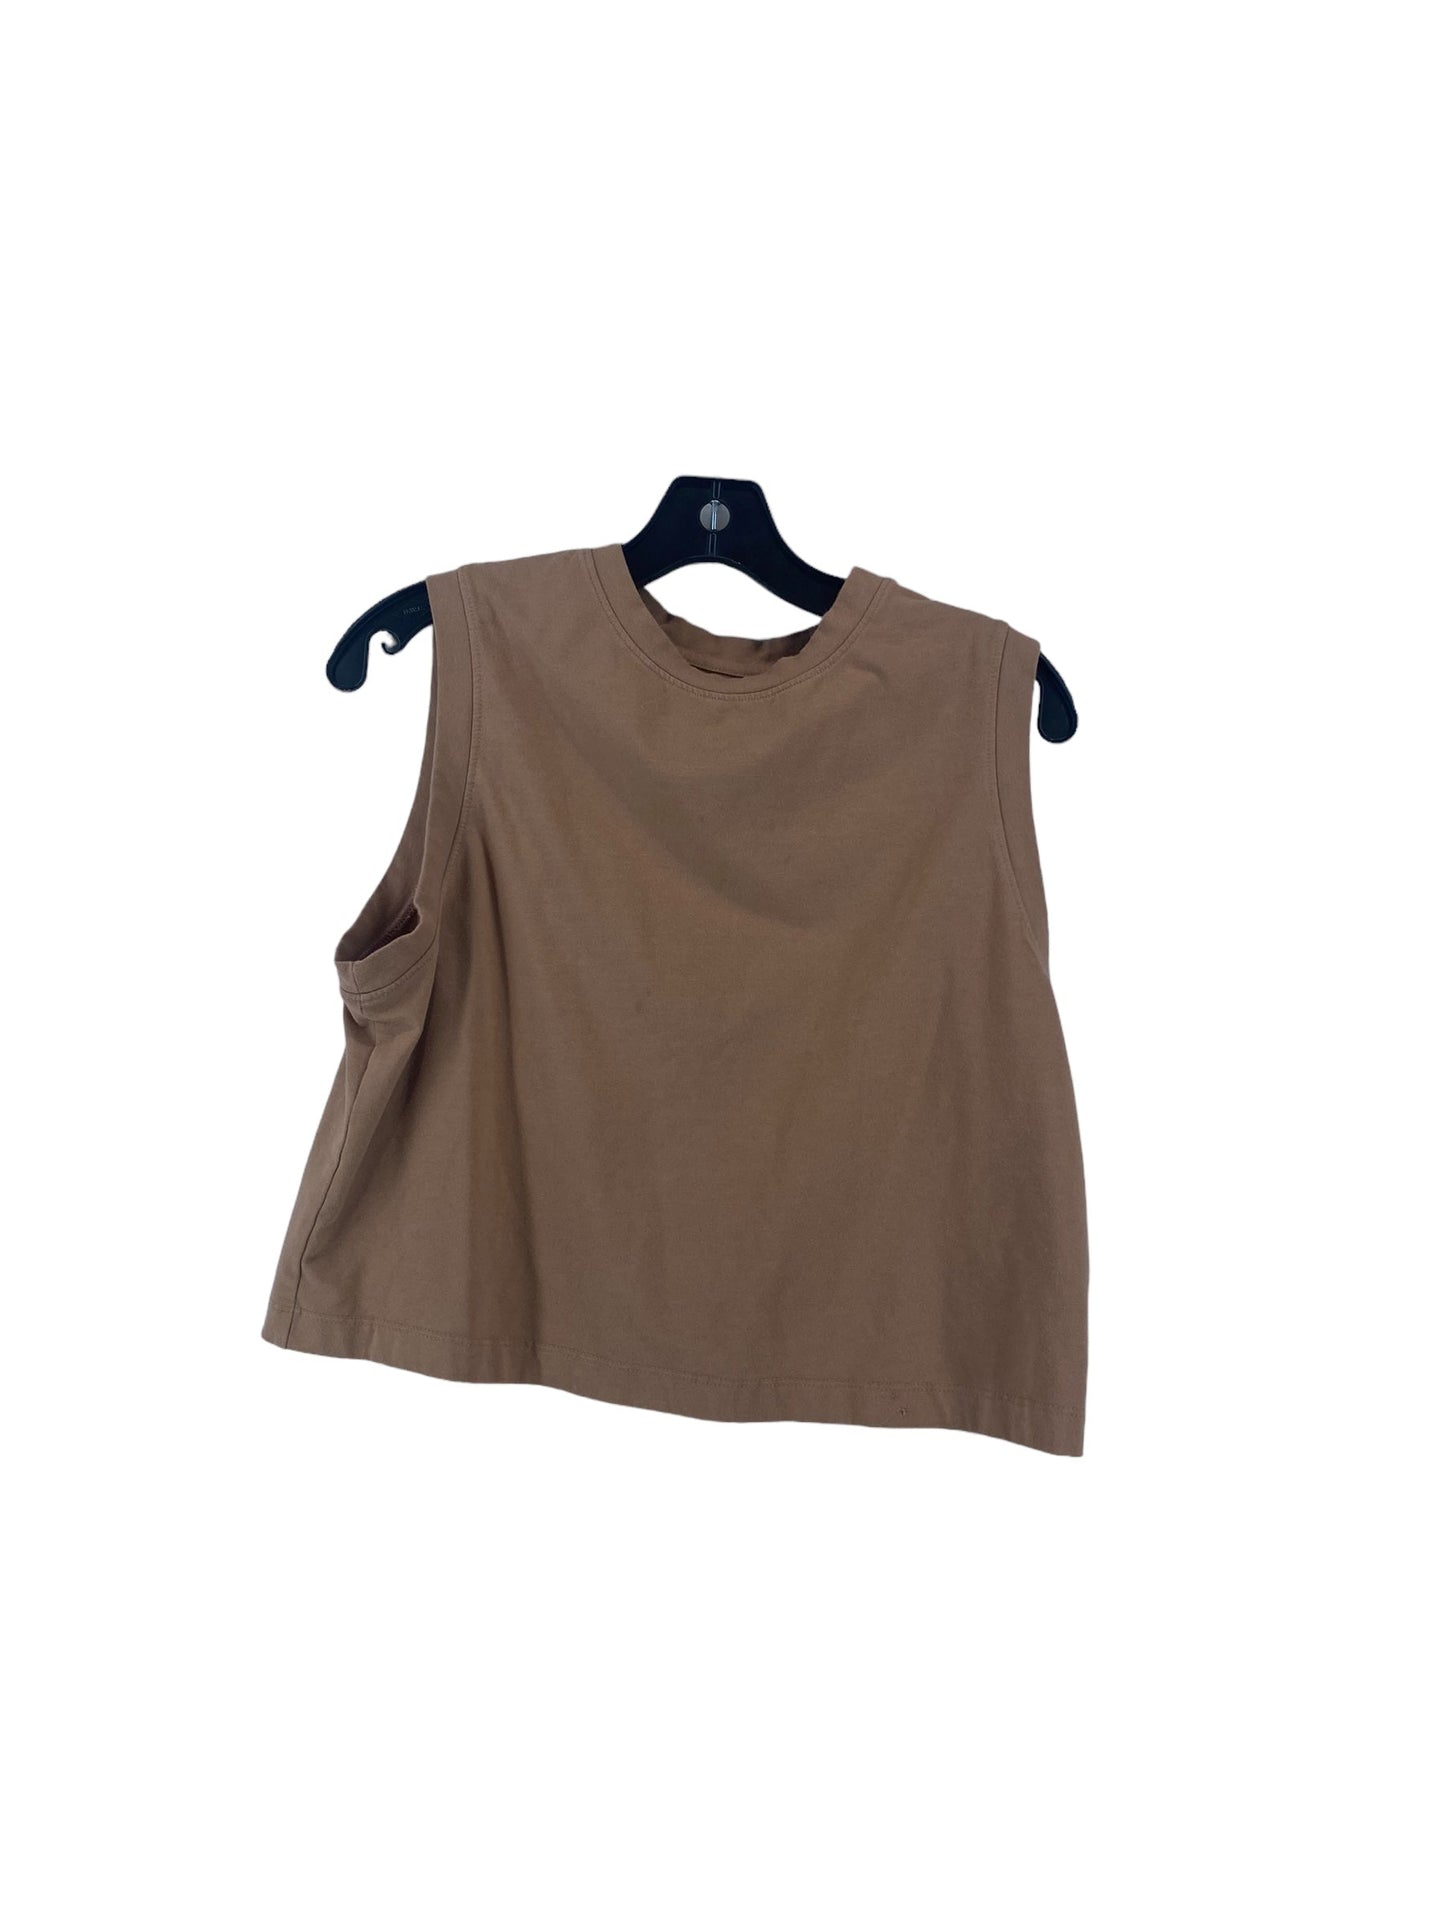 Brown Tank Top A New Day, Size M